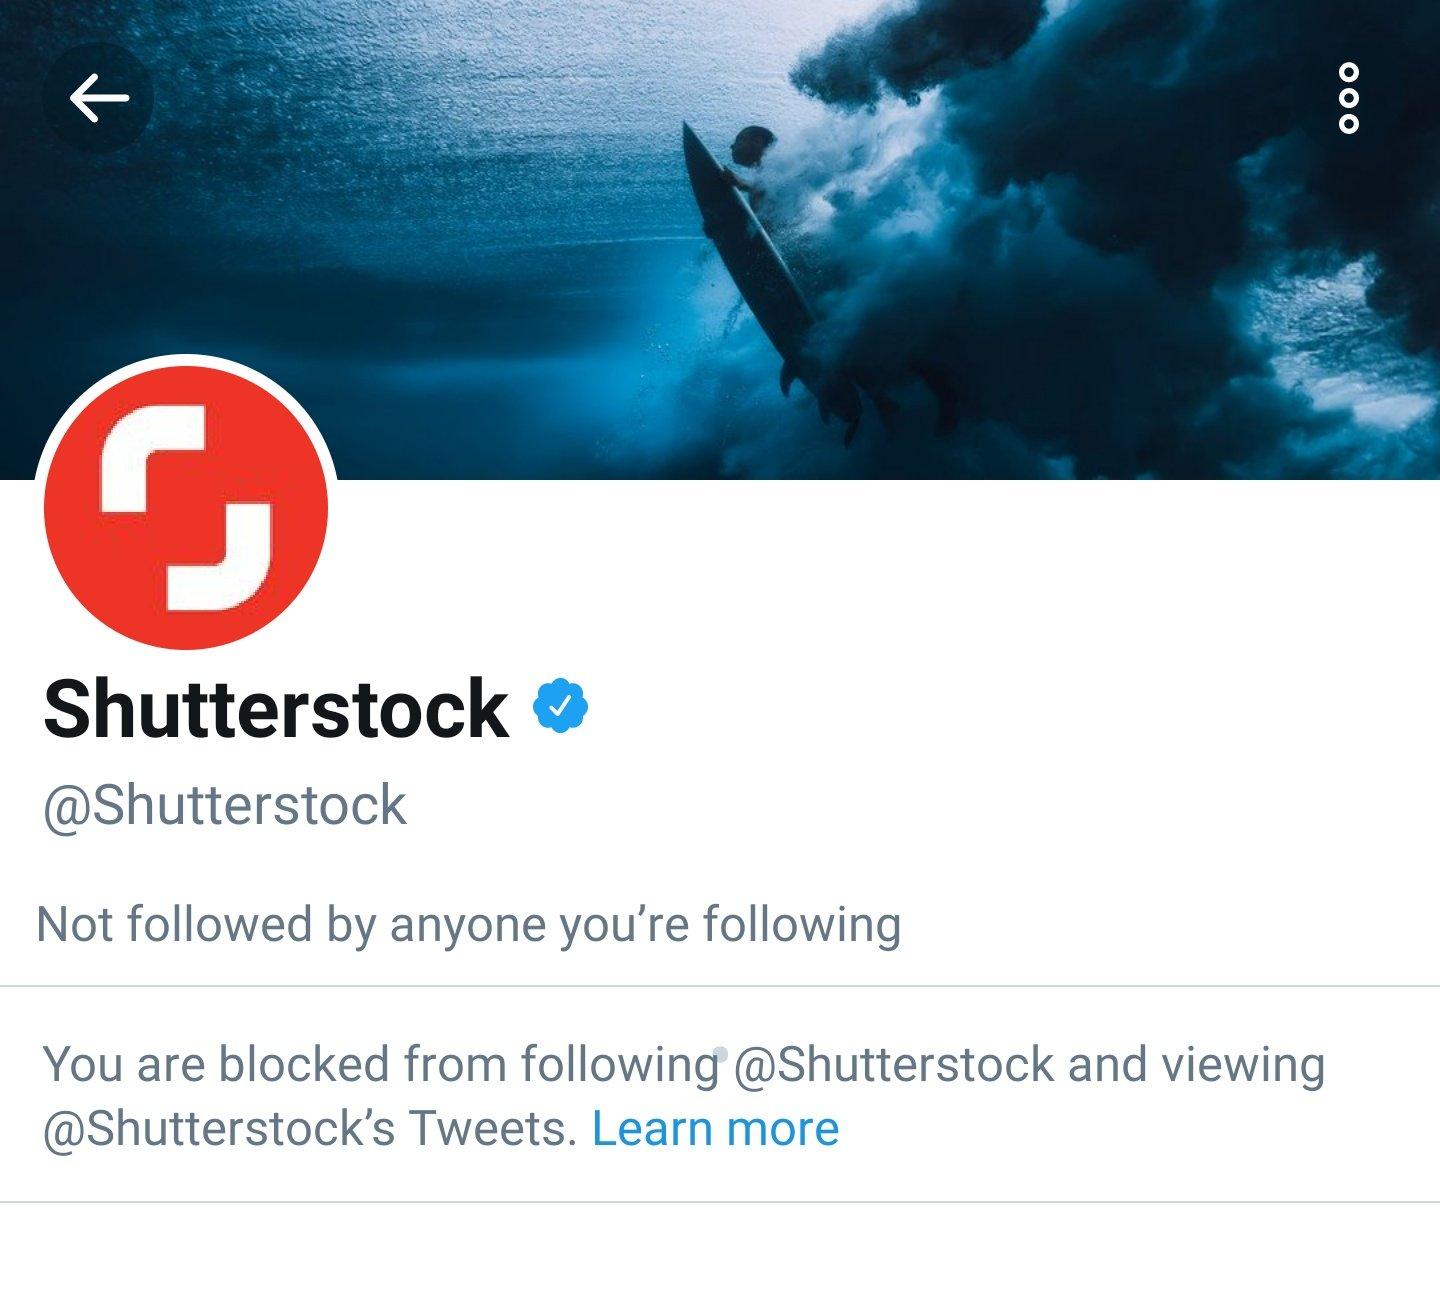 Screenshot of shutterstock blocking my account since I talk about their censorship in china